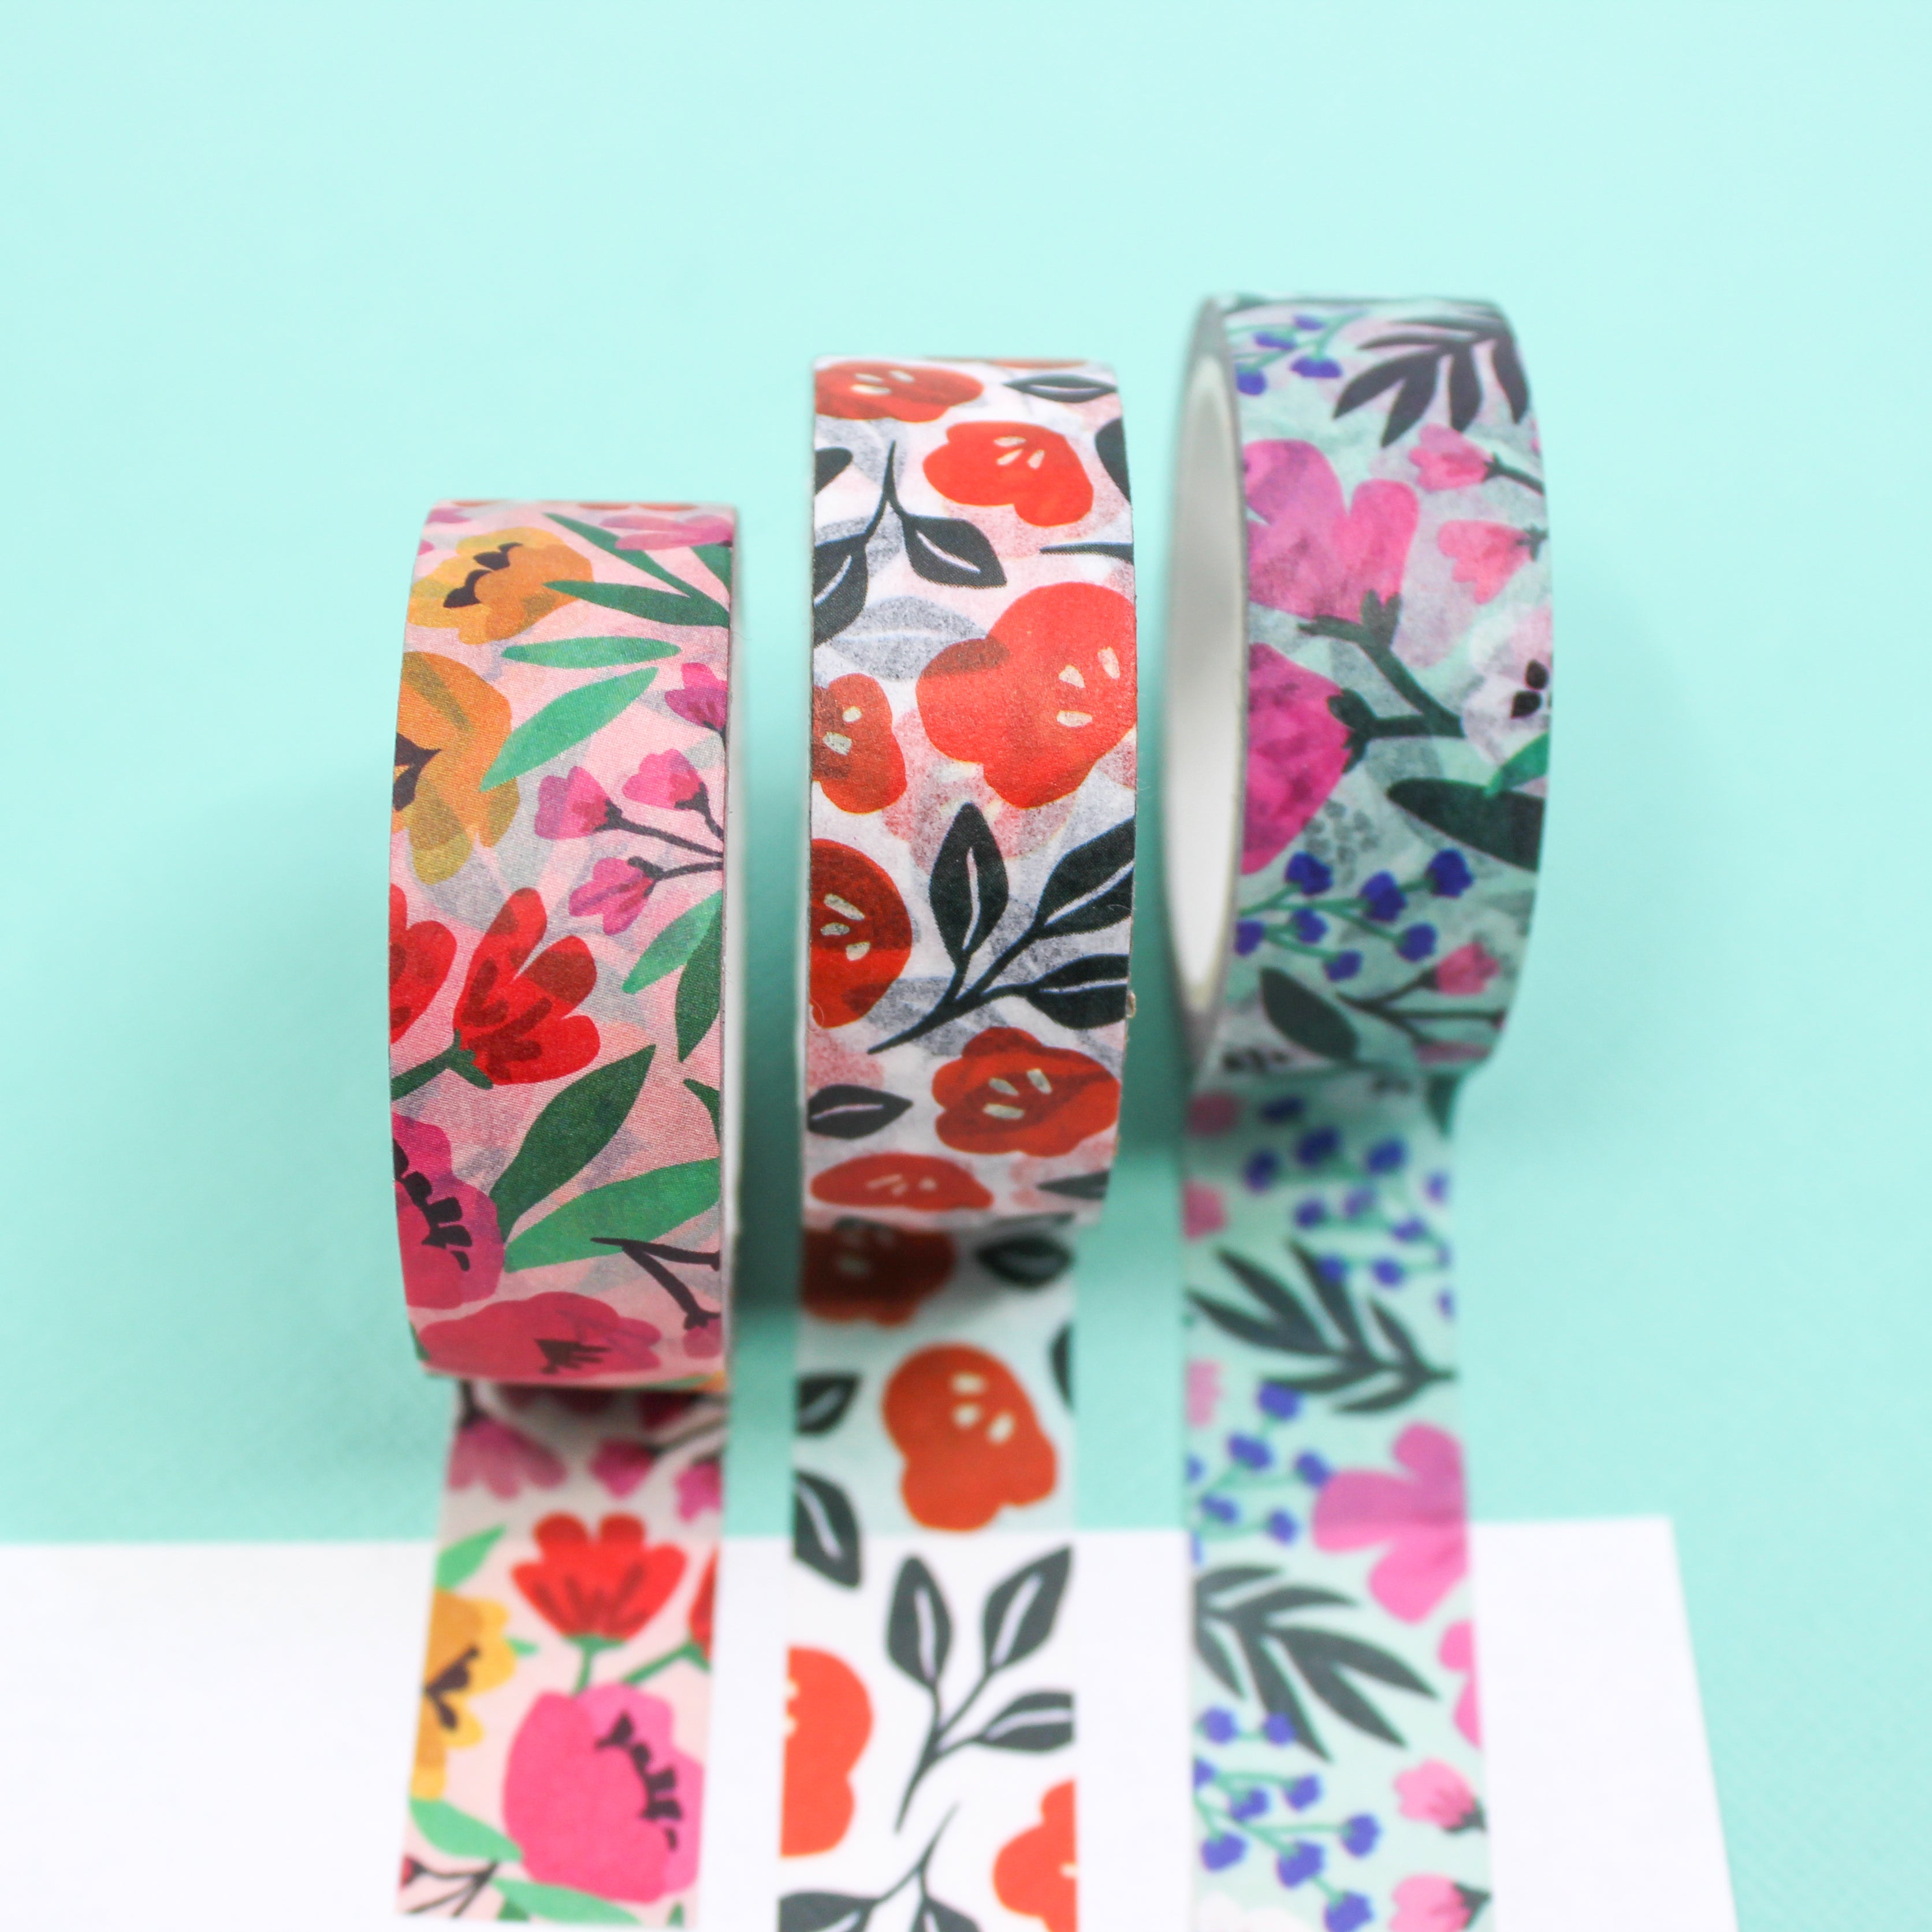 Cute Washi Tape Washi Tape Journaling Tape Gift Ideas Gifts for Her Cute  Gifts Decorative Tape Pretty Tape Cute Tape 